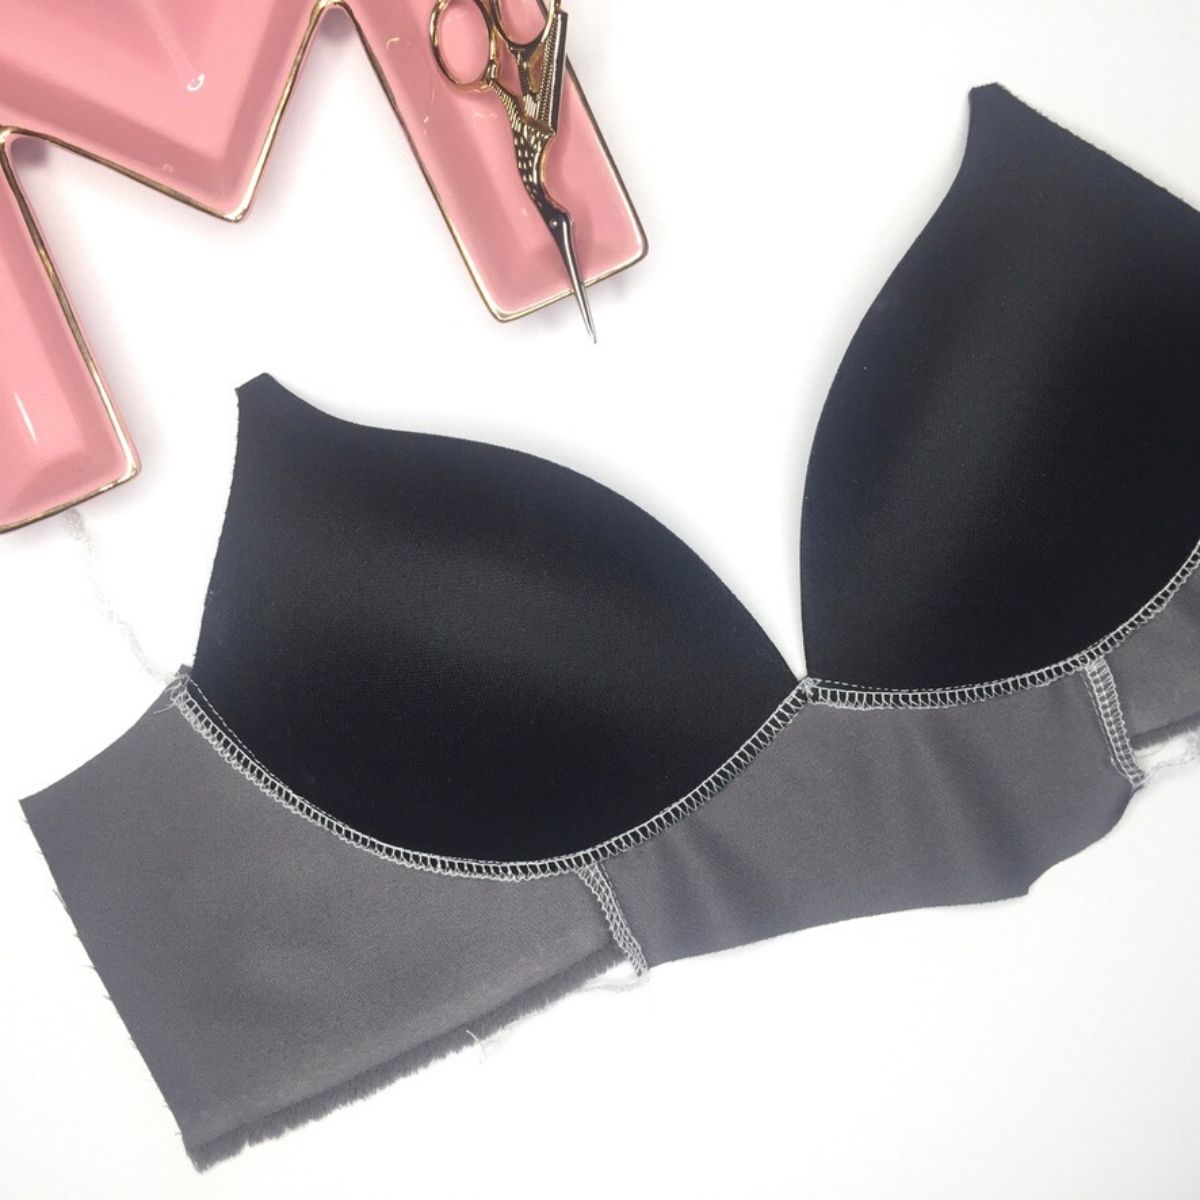 SOFT Molded Bra Cups, Tall Triangle Push Up (Black) – MIKO Sewing